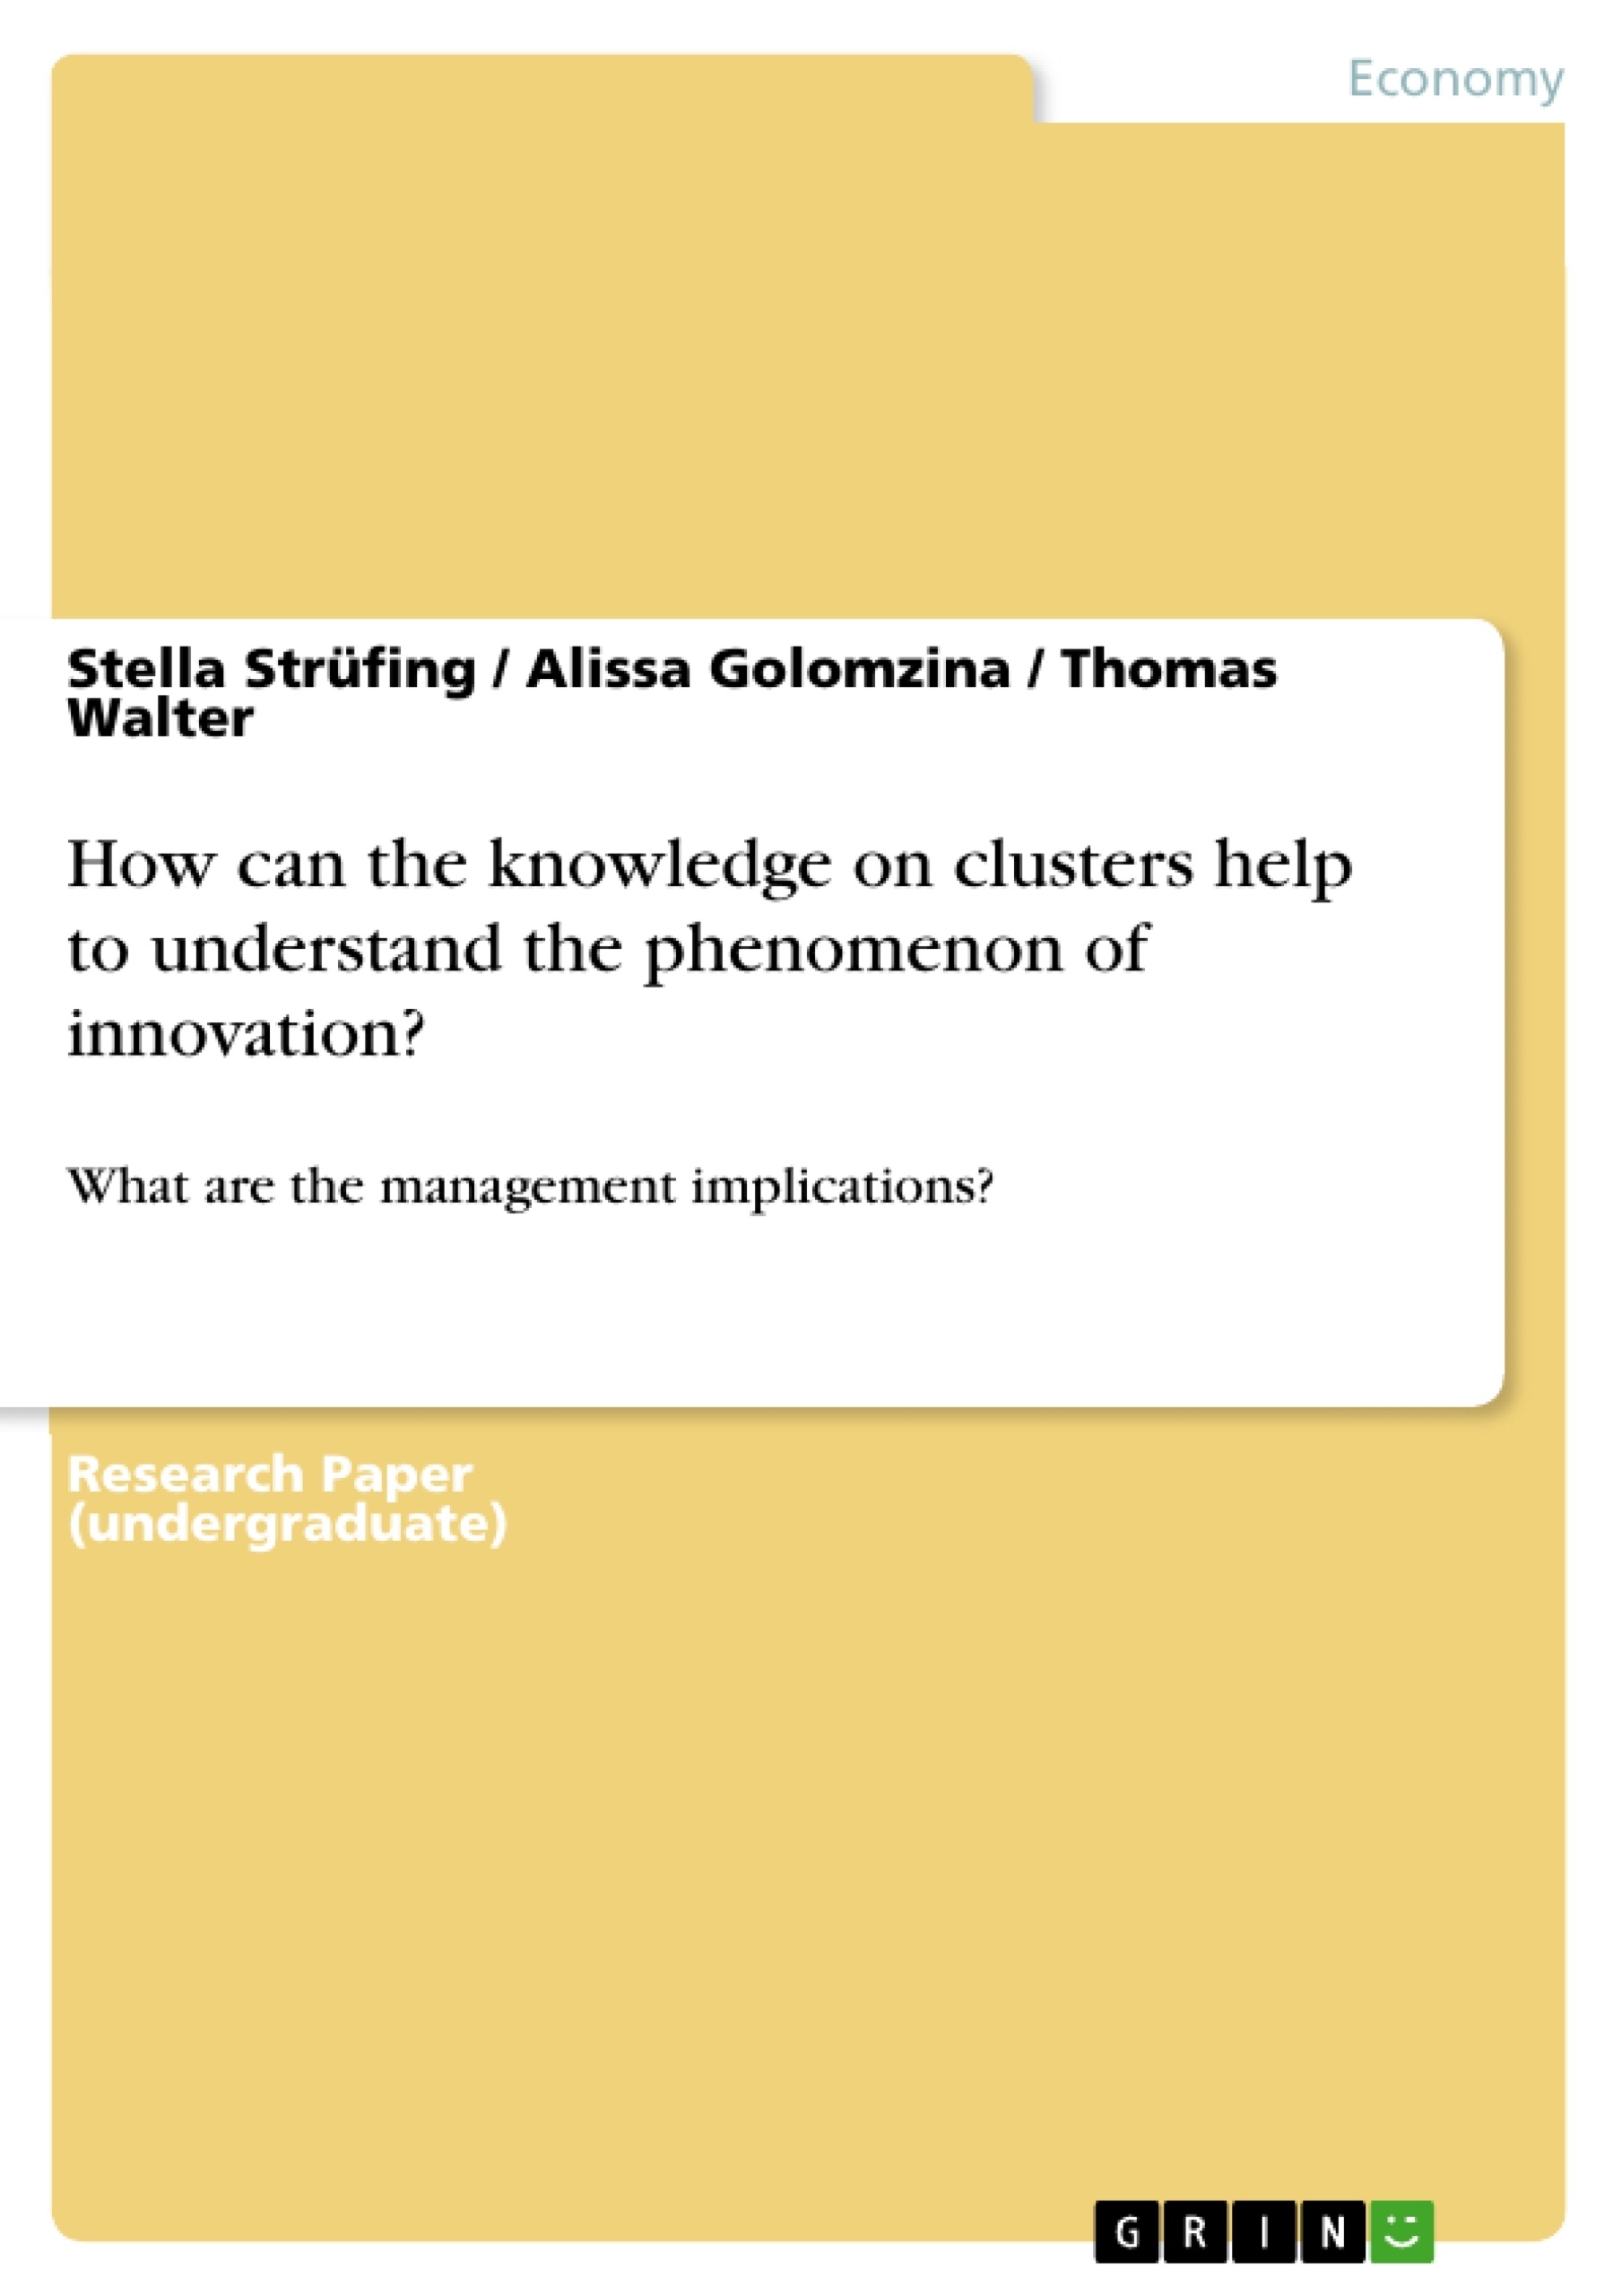 Titel: How can the knowledge on clusters help to understand the phenomenon of innovation?